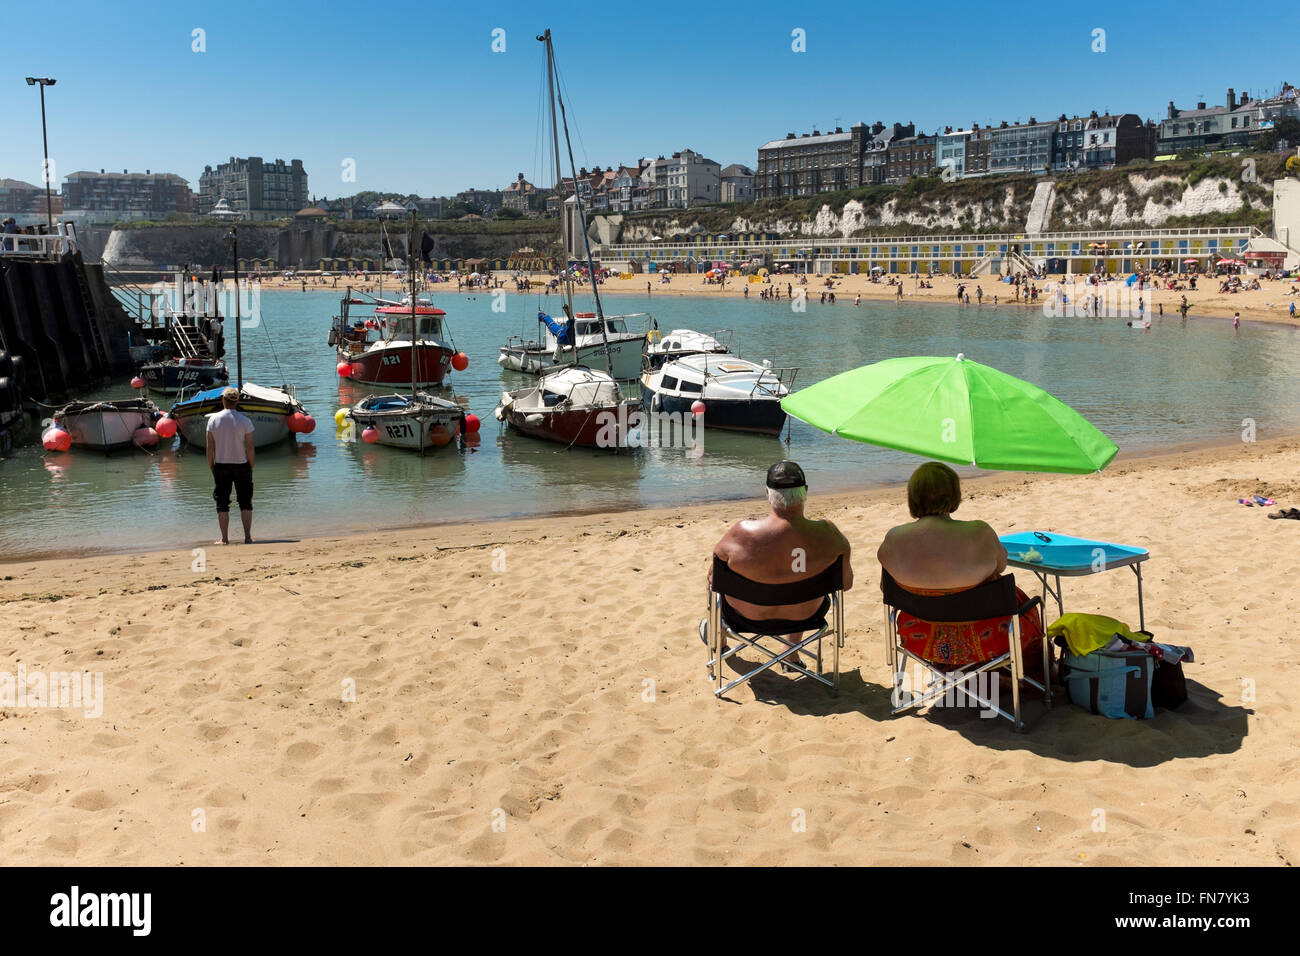 Middle age sunbathers on sandy beach in Broadstairs, Kent, UK Stock Photo